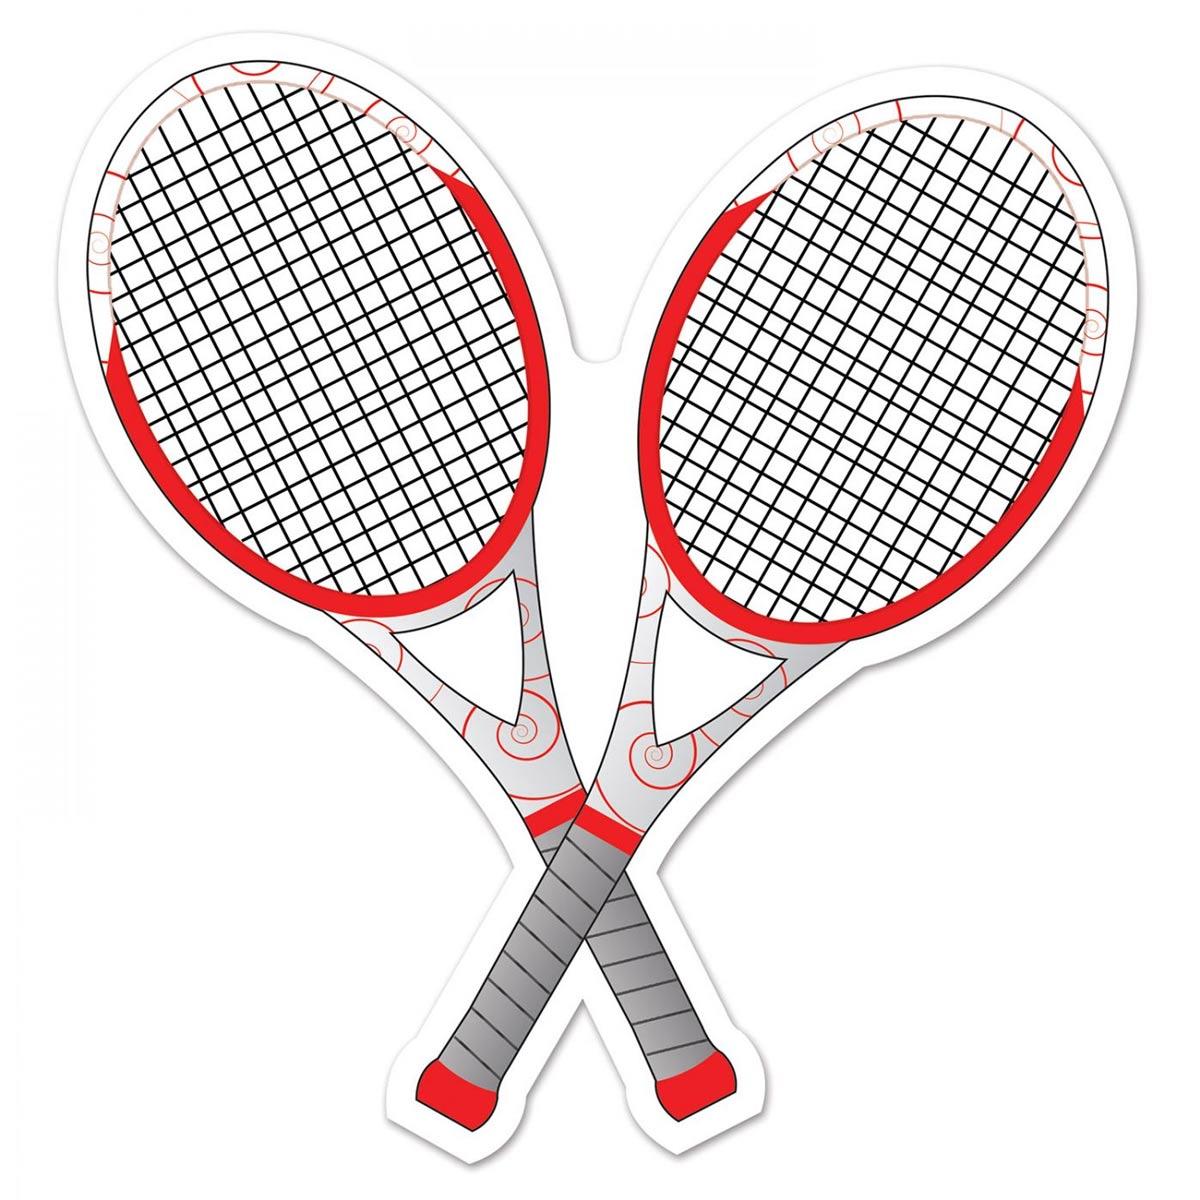 Tennis Racquets Cutout 10" Wimbledon Themed party decoration by Beistle 54741 available here at Karnival Costumes online party shop